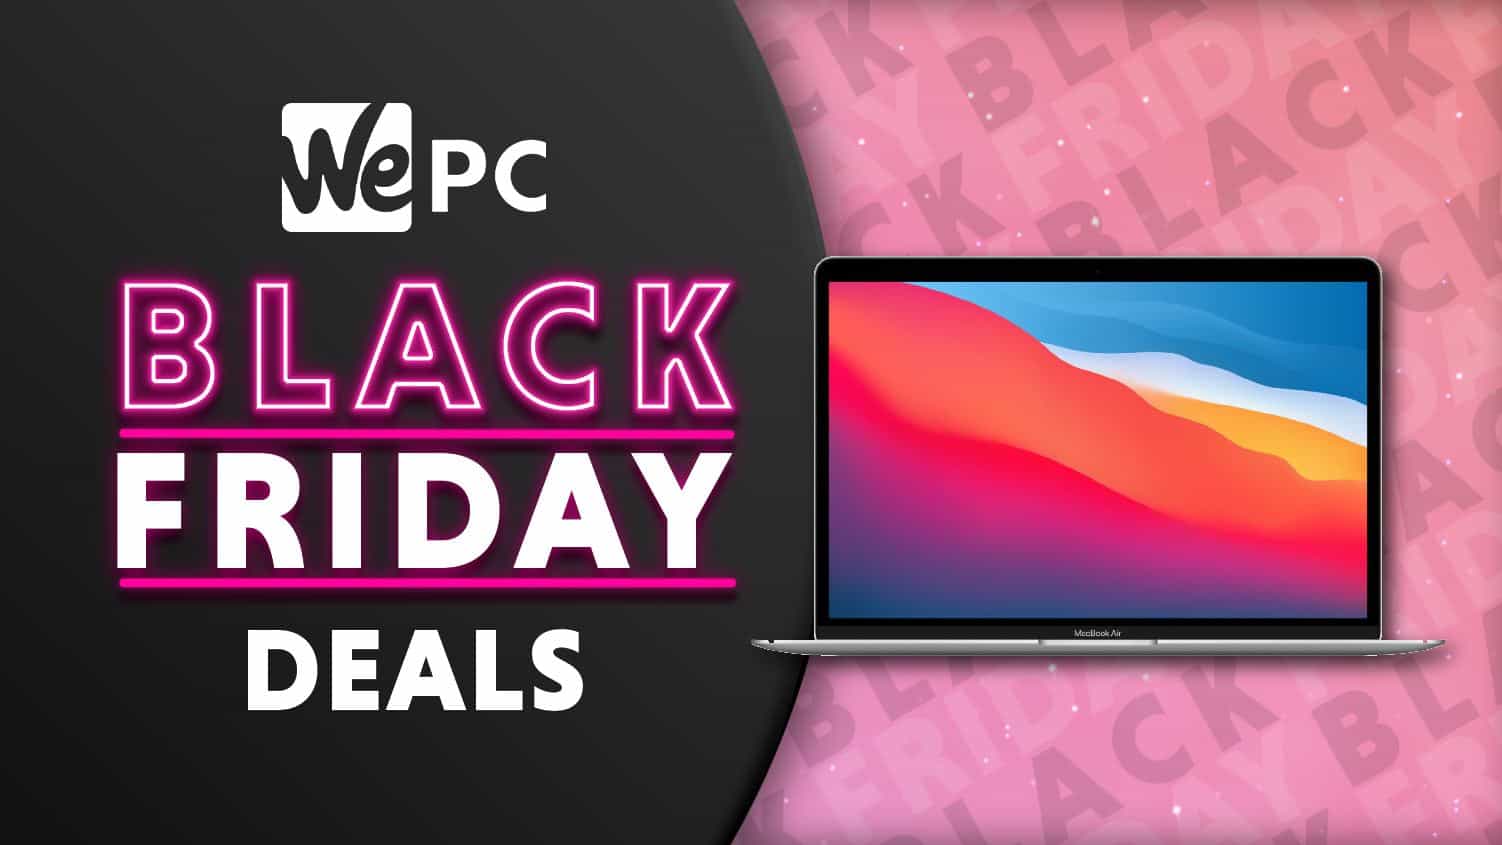 Save $150 on the MacBook Air 13.3″ Early Black Friday deals